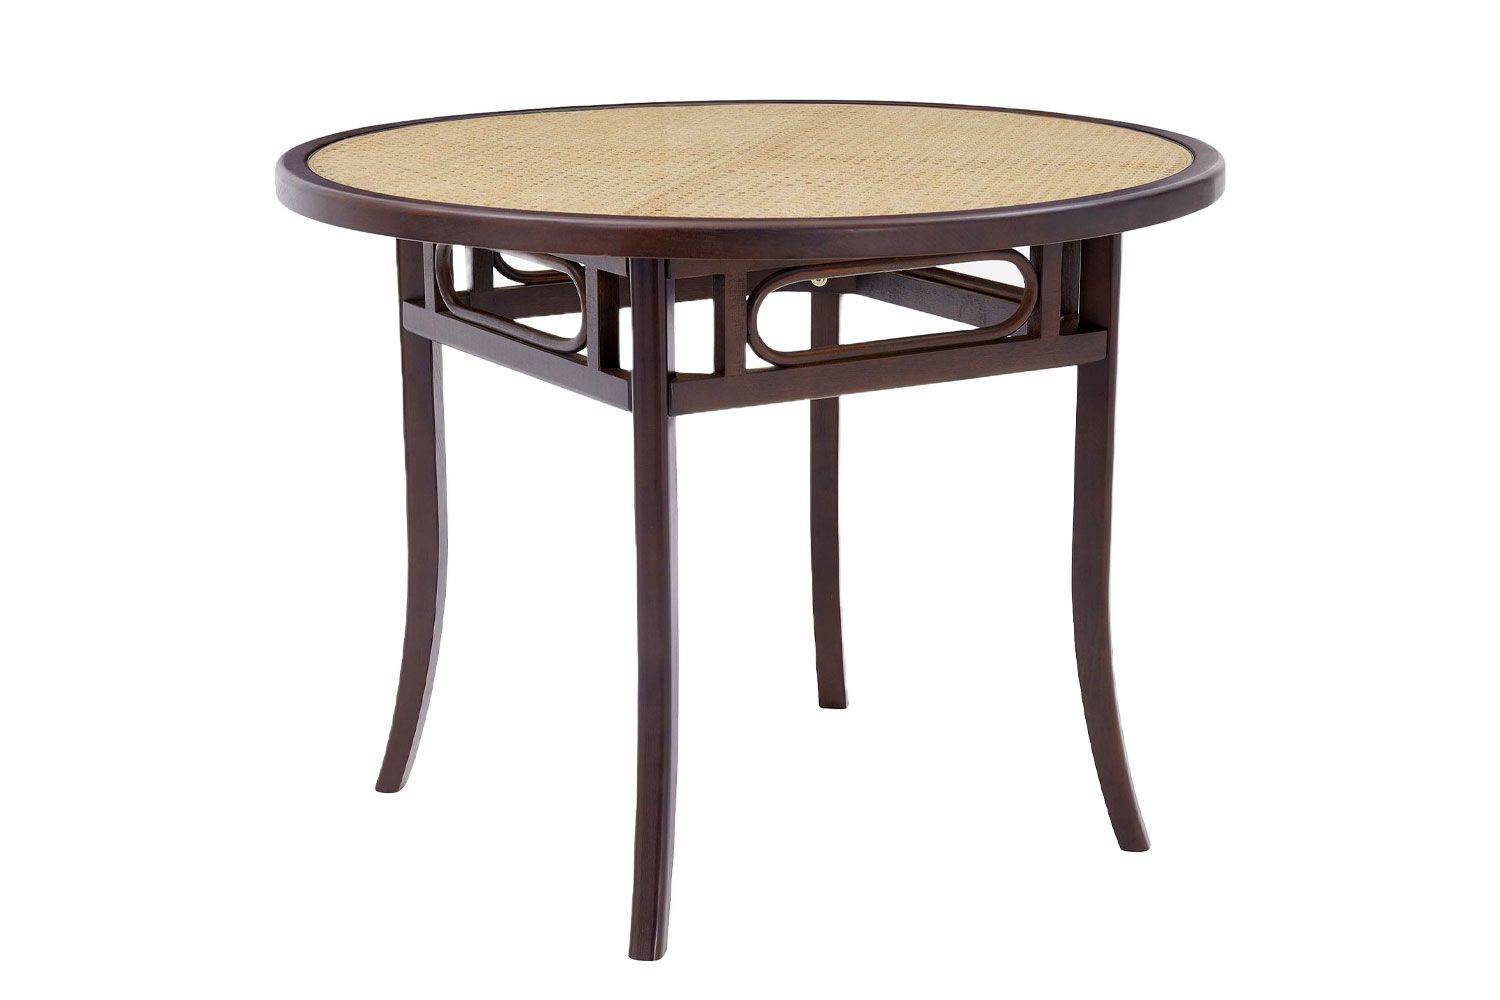 Pottery Barn Elsinore Cane Round Dining Table